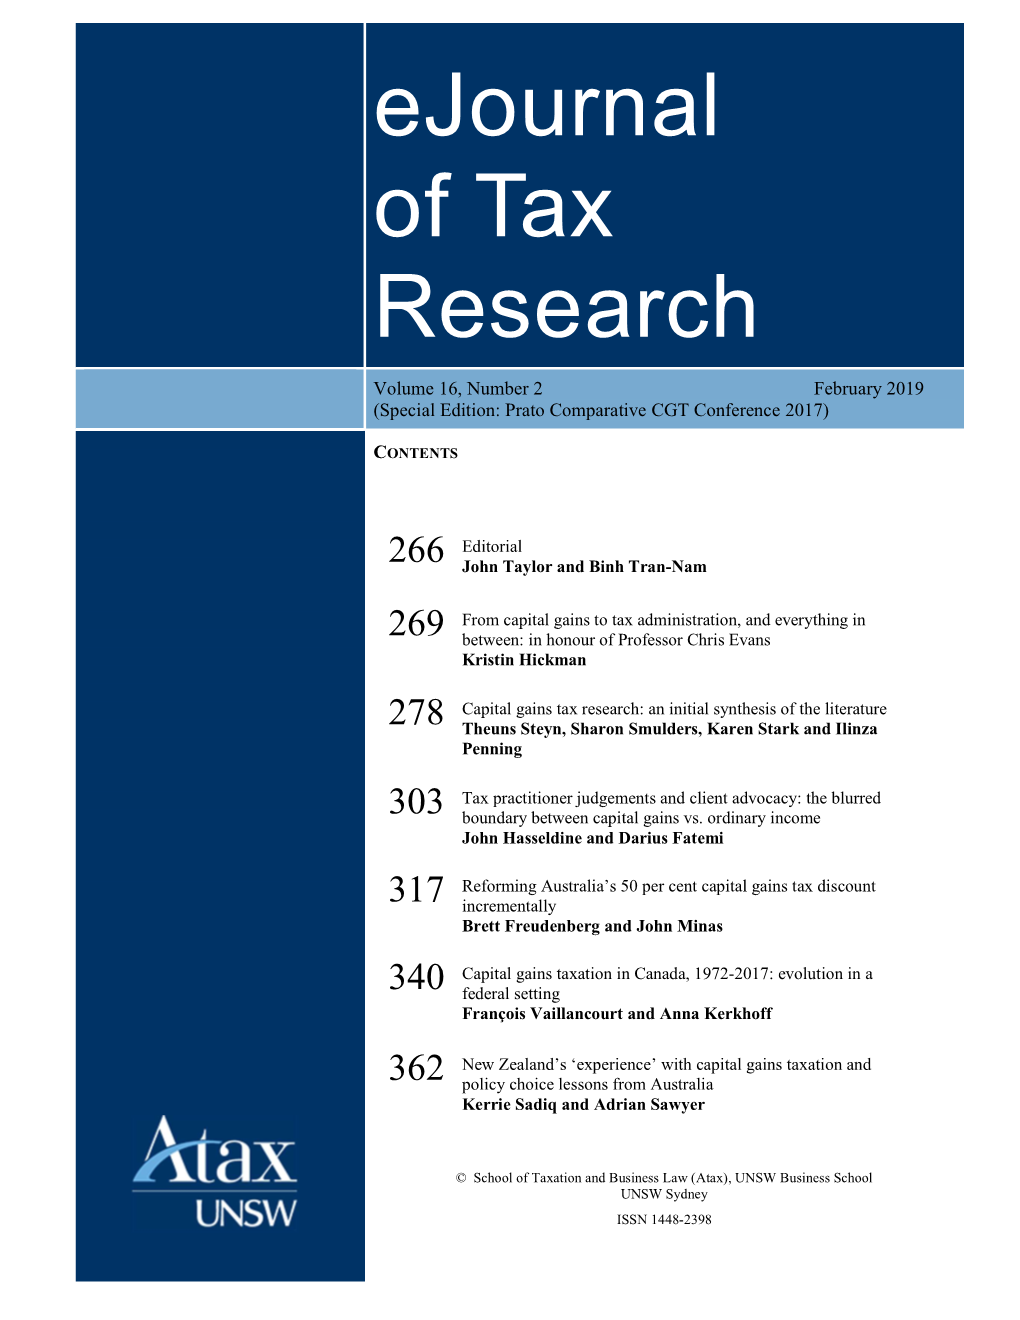 Ejournal of Tax Research